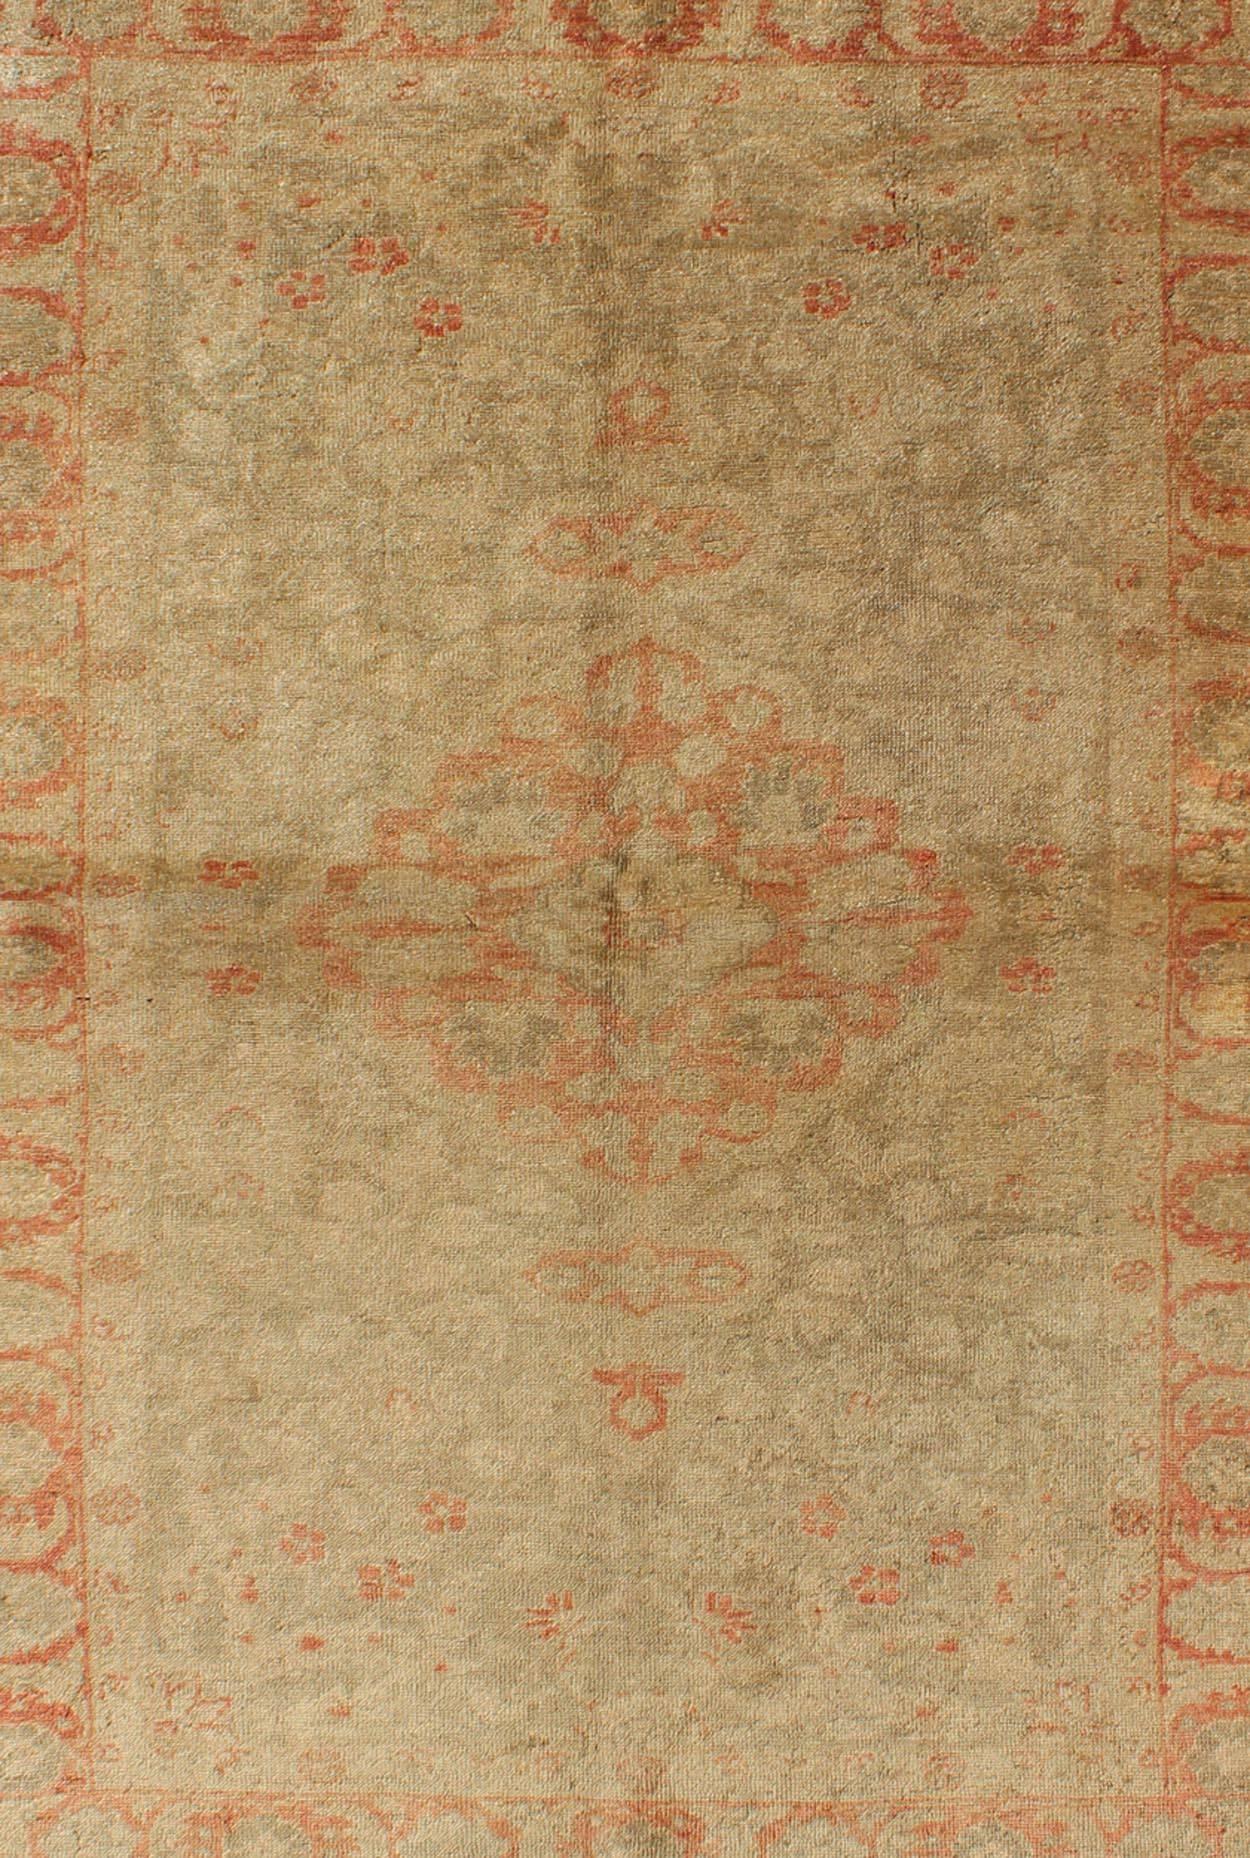 Oushak Muted Fine-Weave Sivas Rug with Botanical and Floral Elements in Red & Tan For Sale